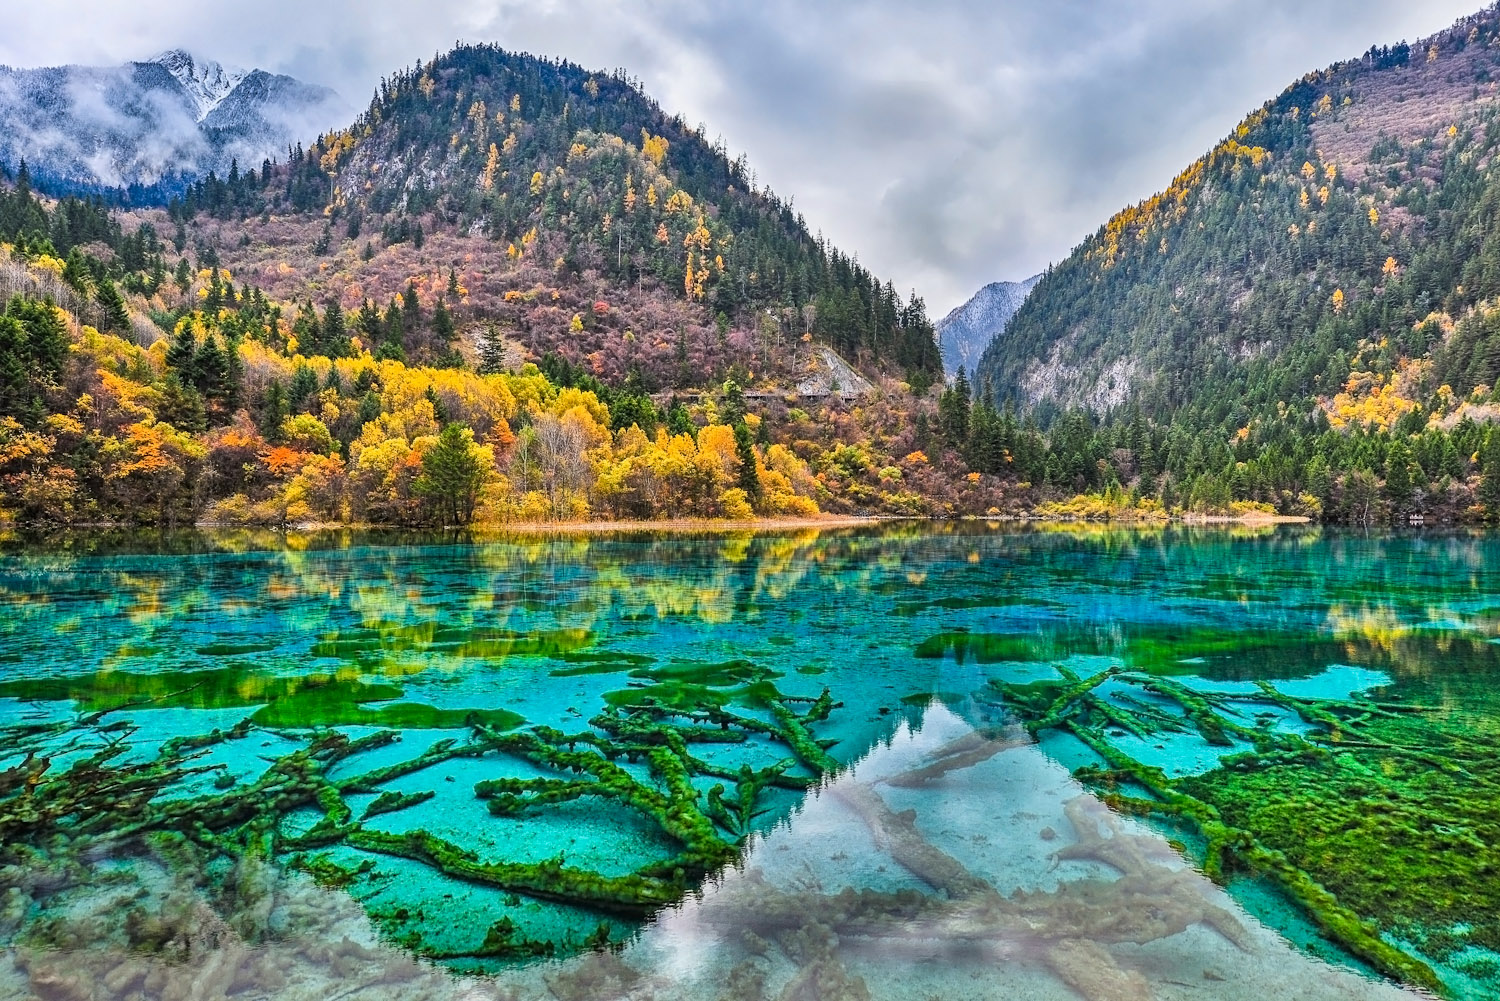 We've found the prettiest place in China - International Traveller